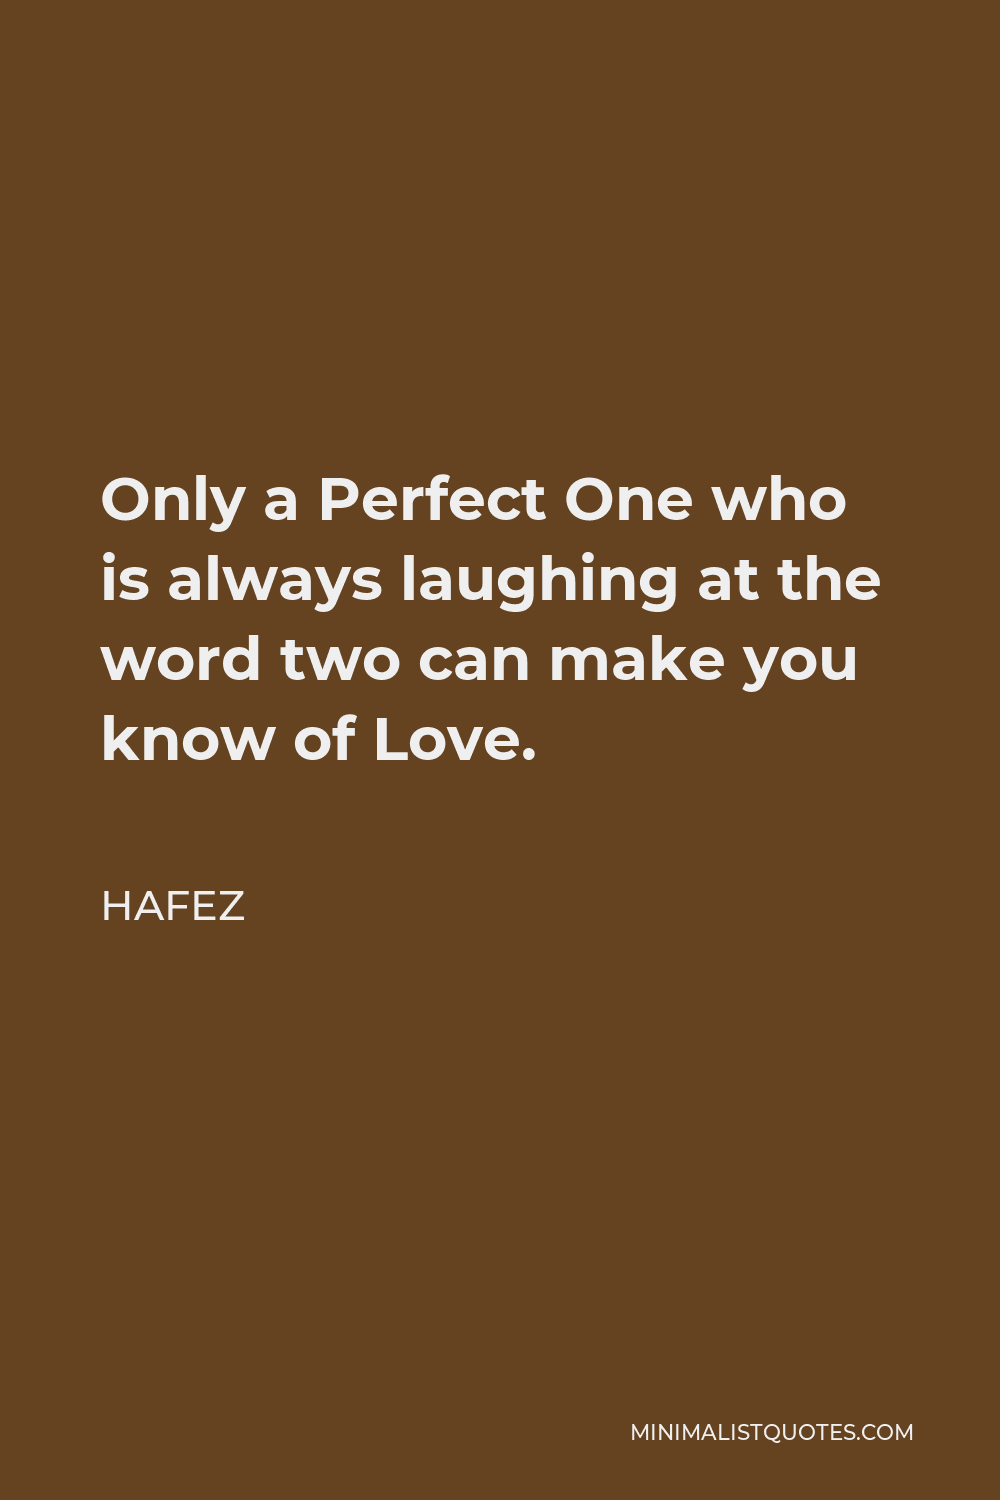 Hafez Quote - Only a Perfect One who is always laughing at the word two can make you know of Love.